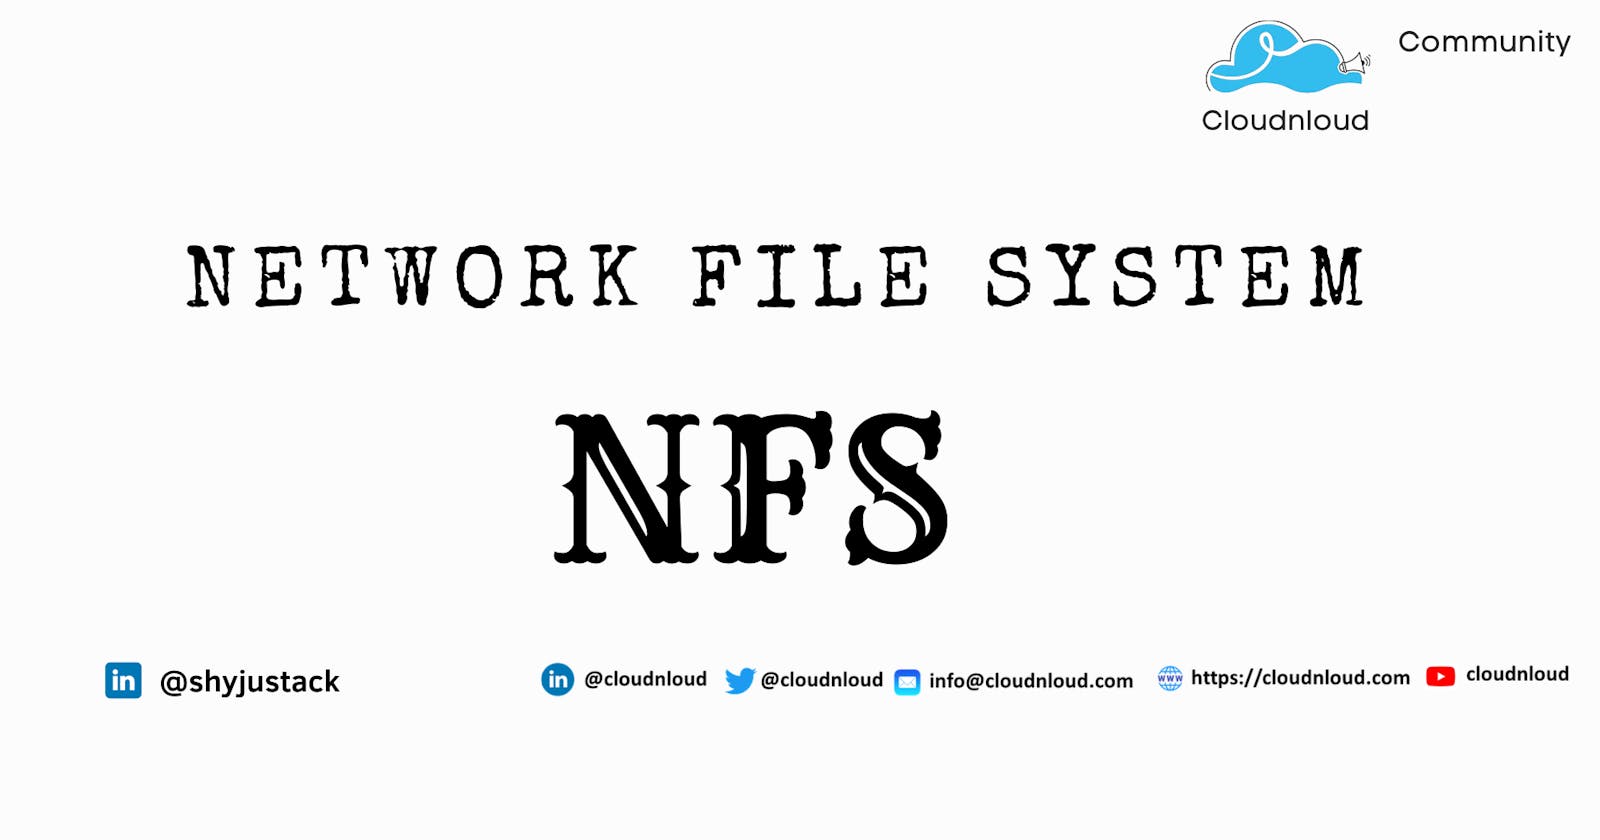 NFS Server and client configuration